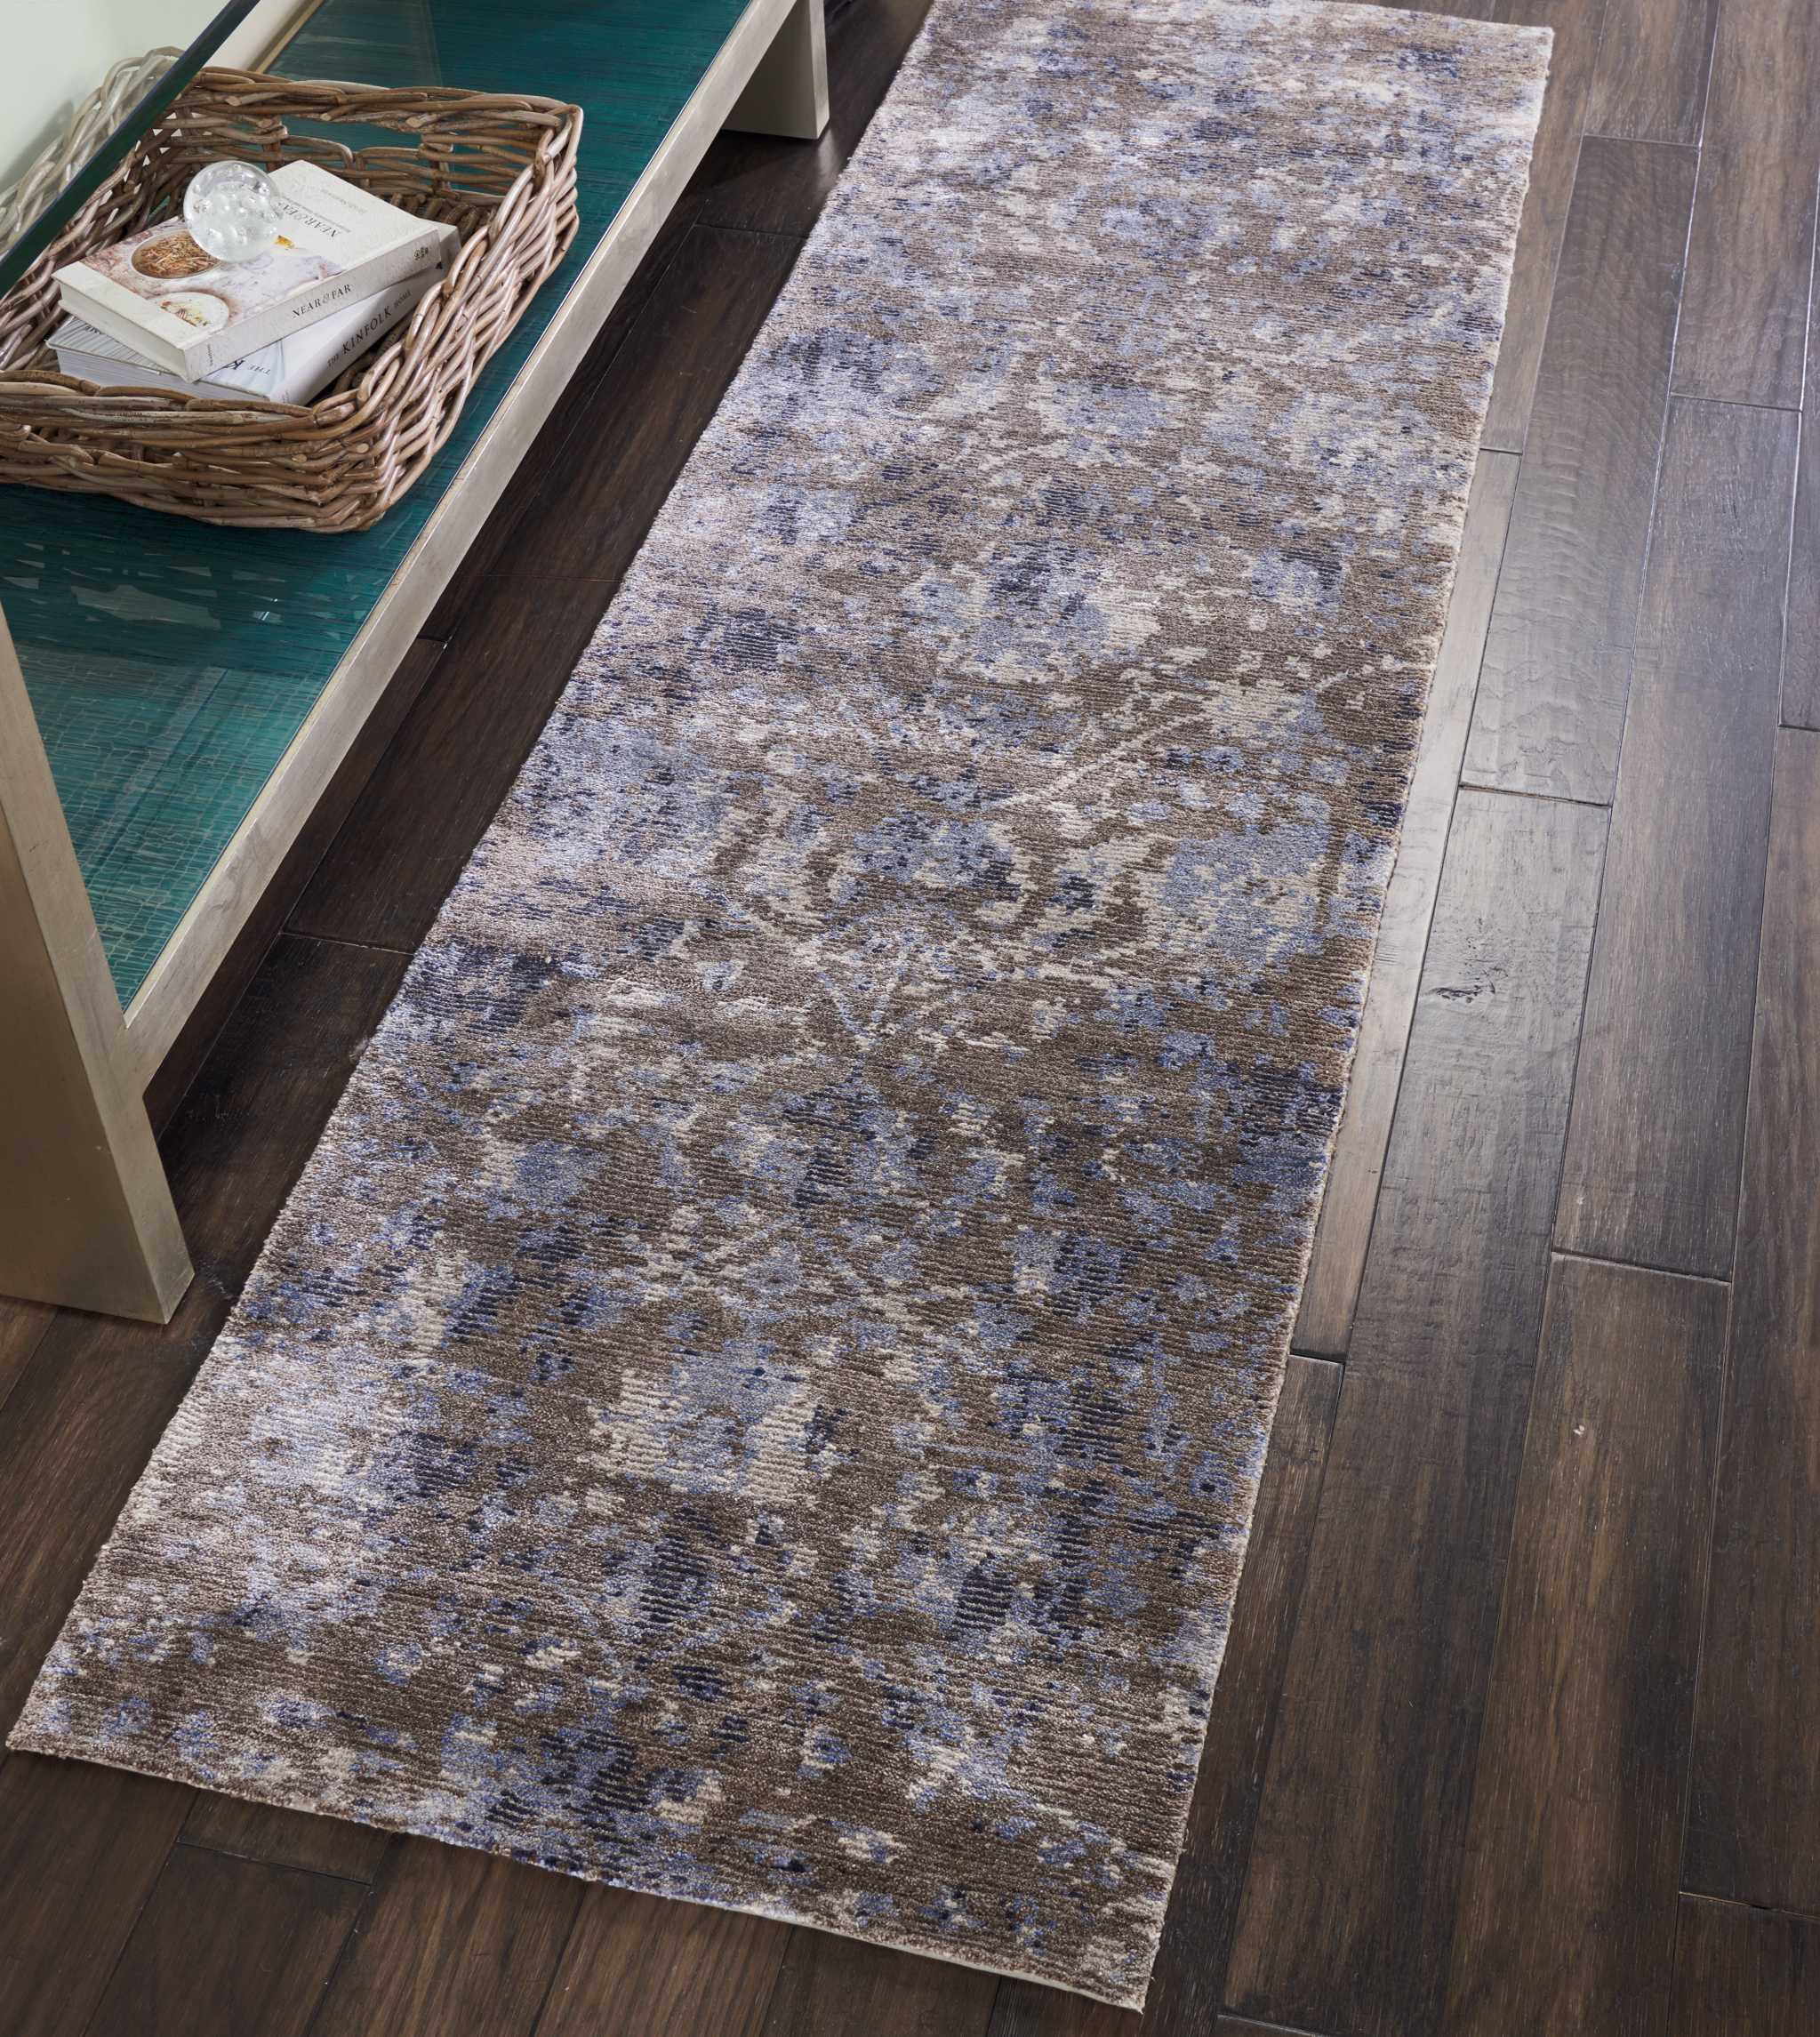 Contemporary rug with abstract distressed pattern complements modern home décor.